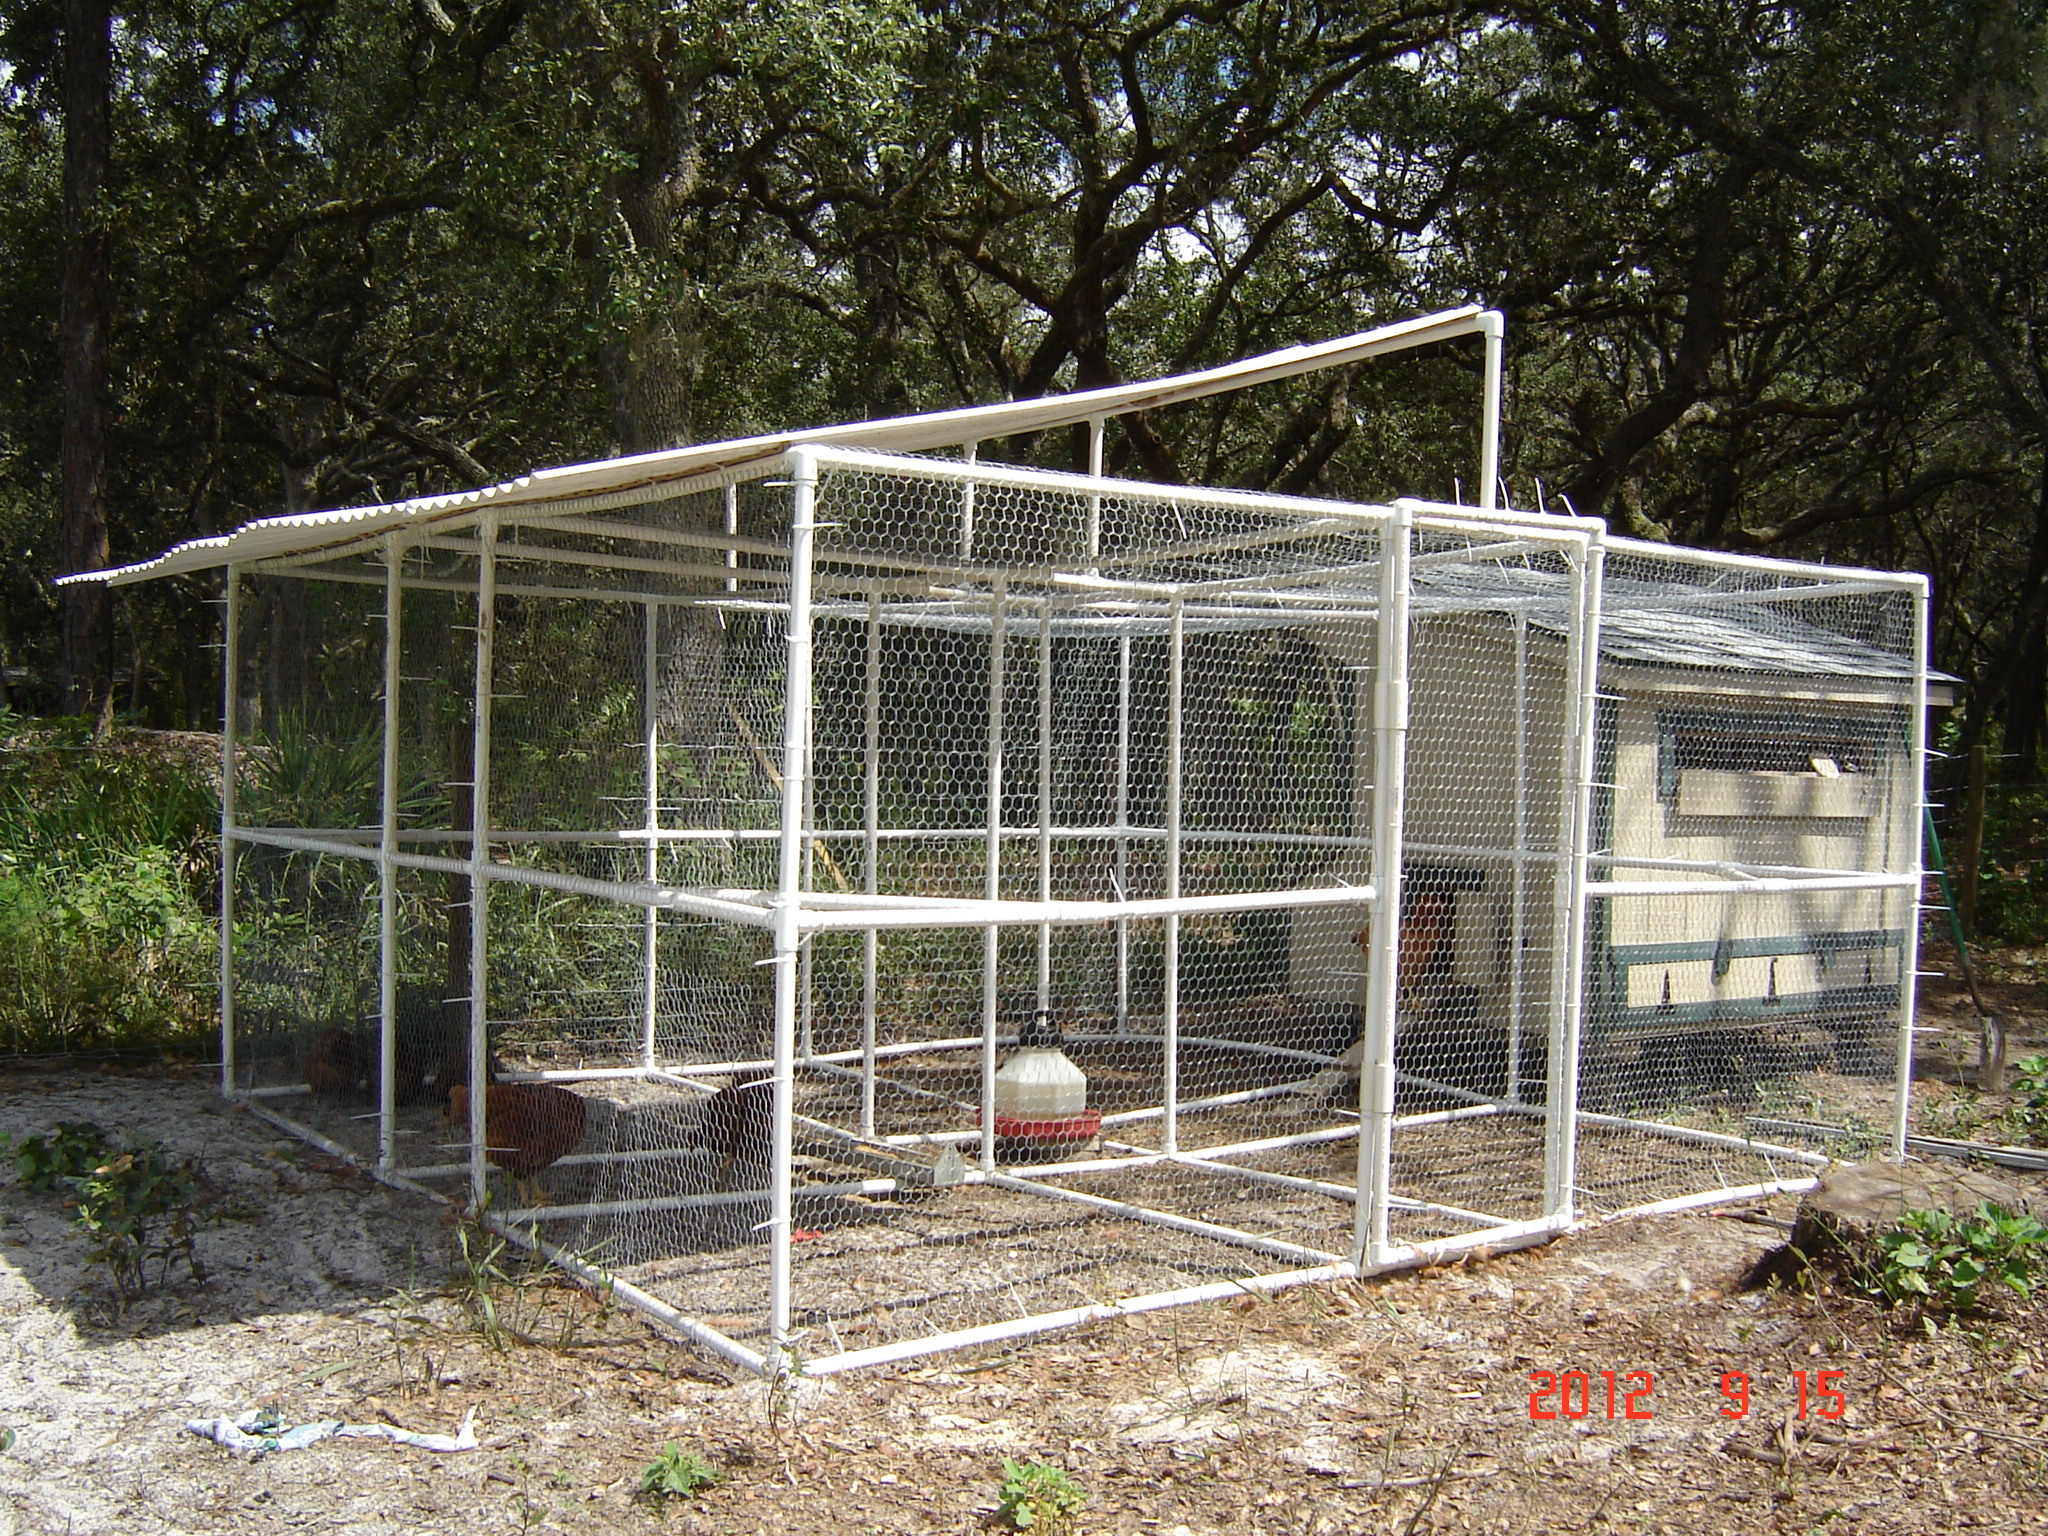 Denny Yam: Chicken house plans for 5000 chickens Diy